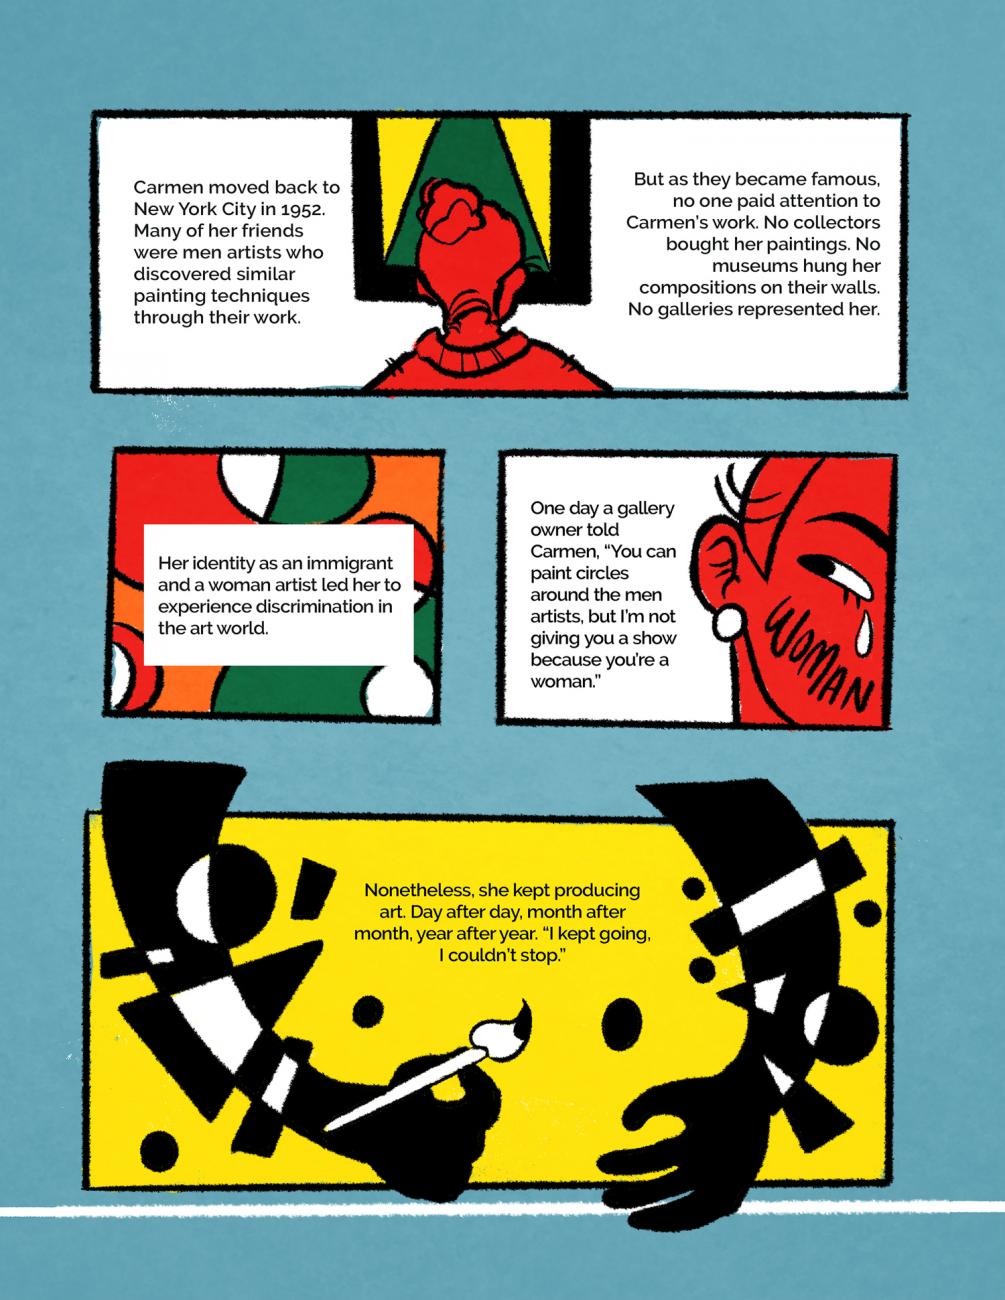 In Awe of the Straight Line: A Comic About Carmen Herrera, page two